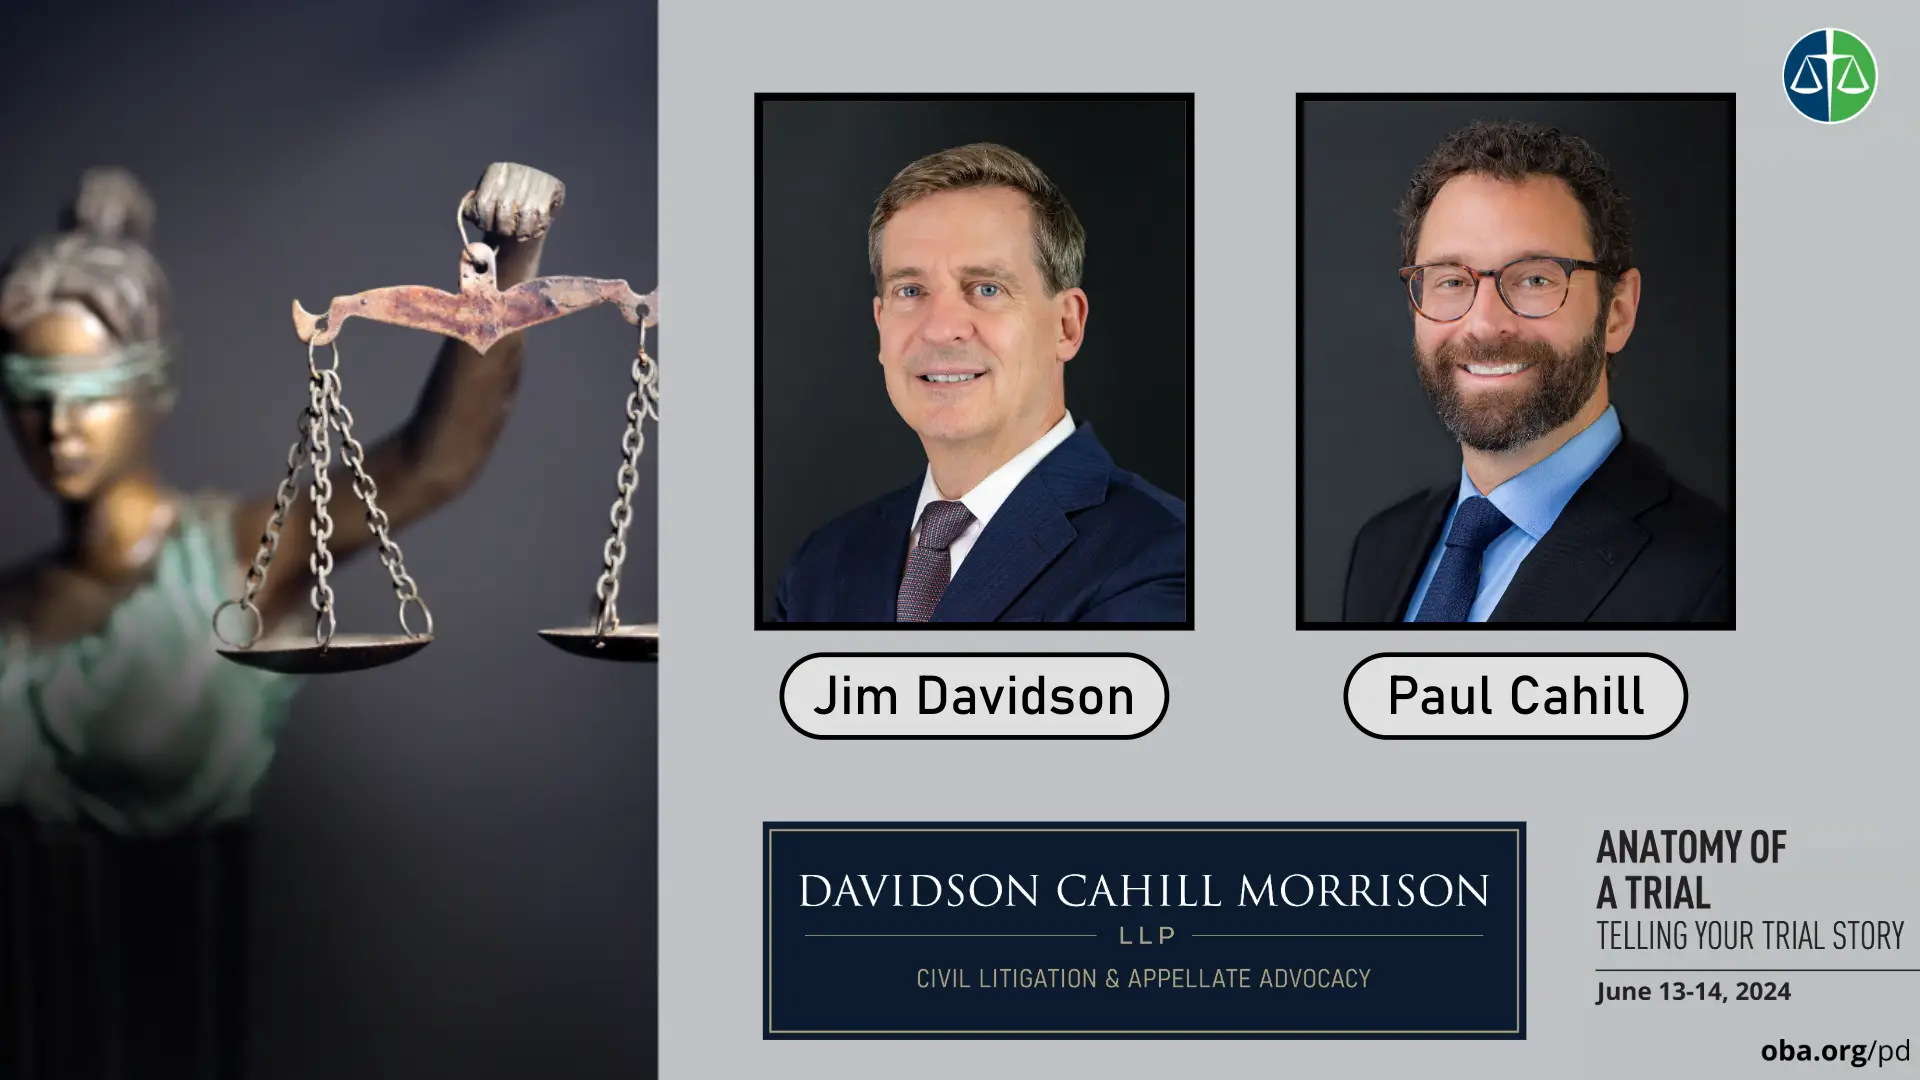 Jim Davidson and Paul Cahill are faculty members of OBA's Anatomy of a Trial